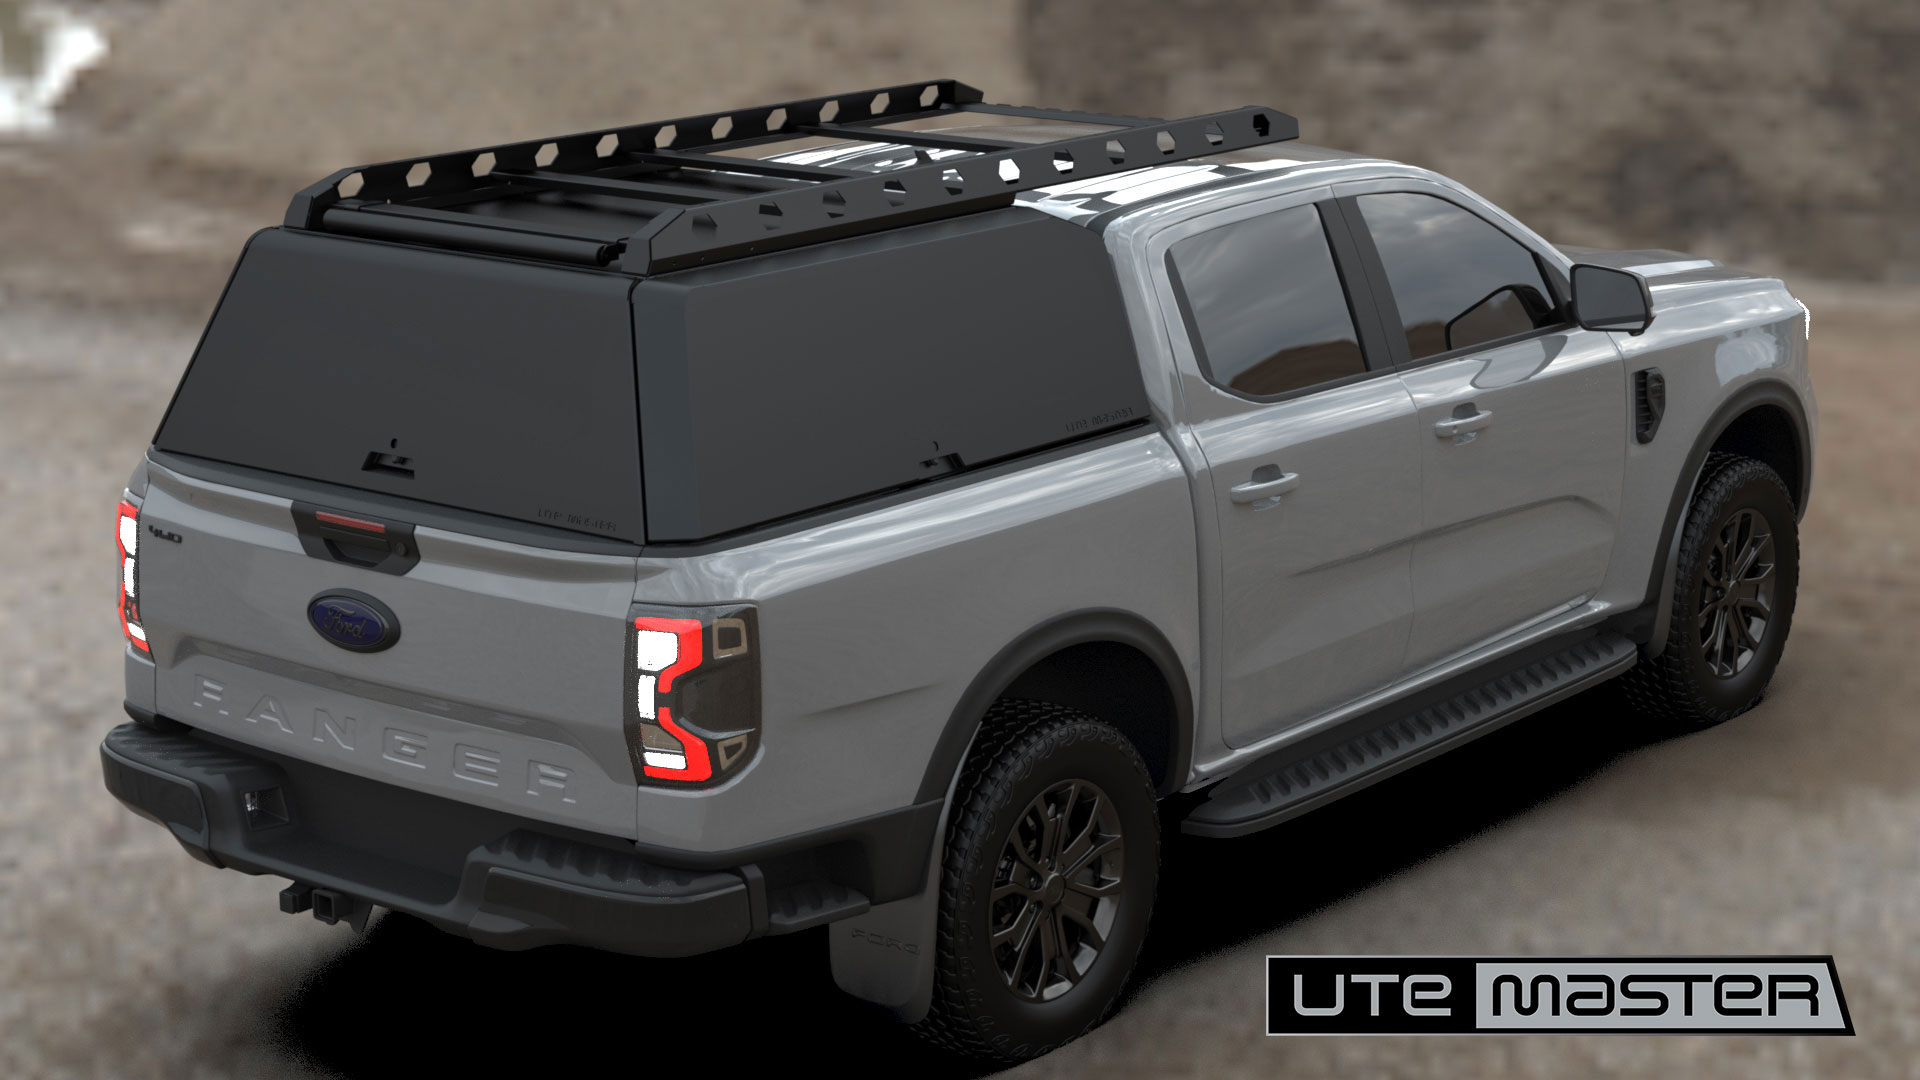 Best Tub Ute Canopy to suit the 2022 Ford Ranger XLT Sport Wildtrak